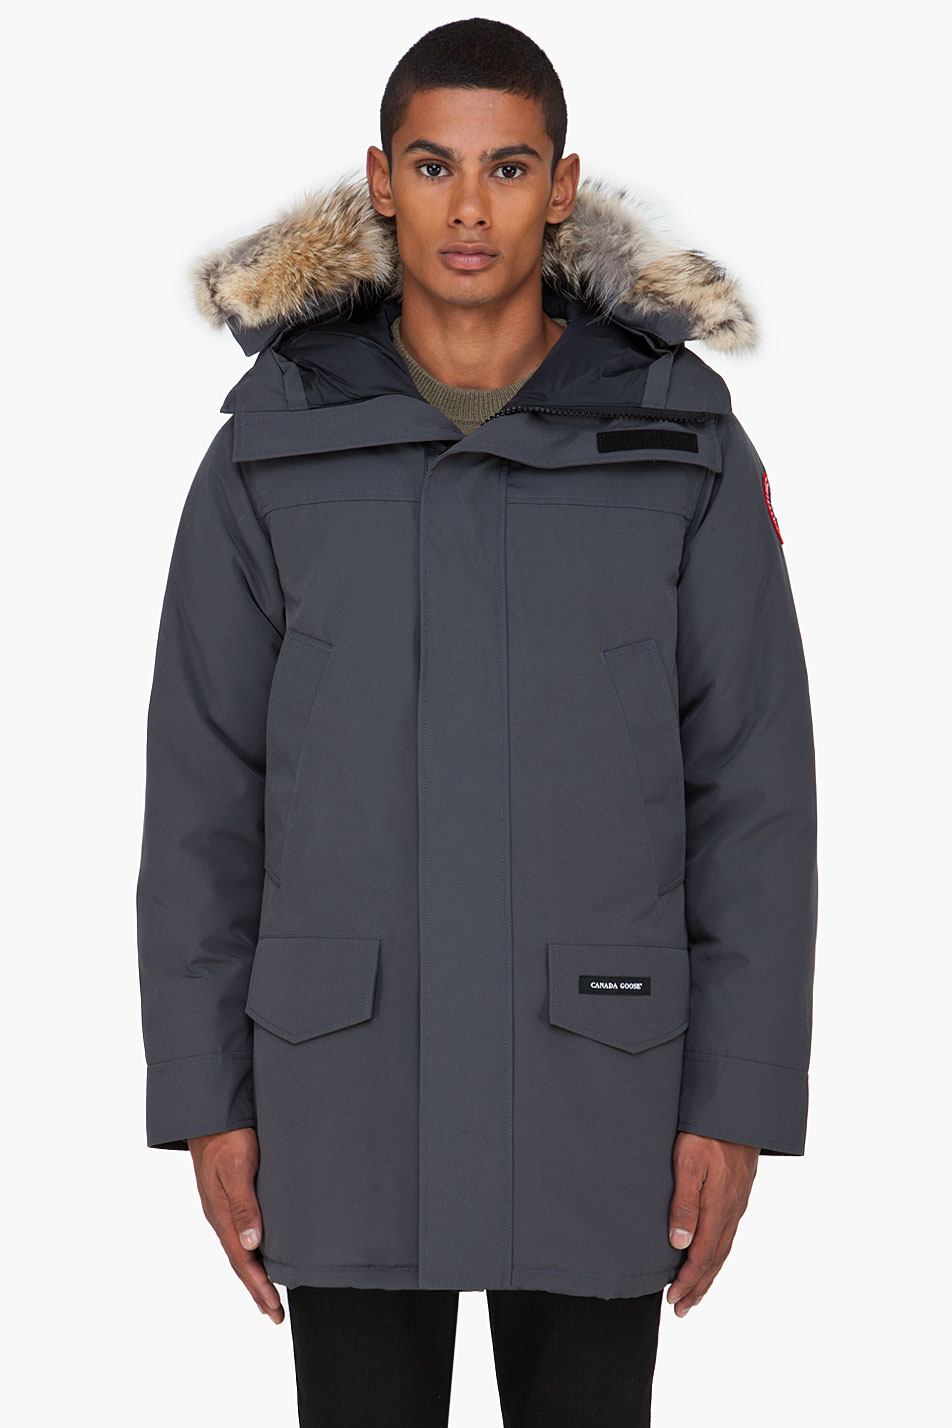 Lyst - Canada Goose Charcoal Langford Parka in Gray for Men